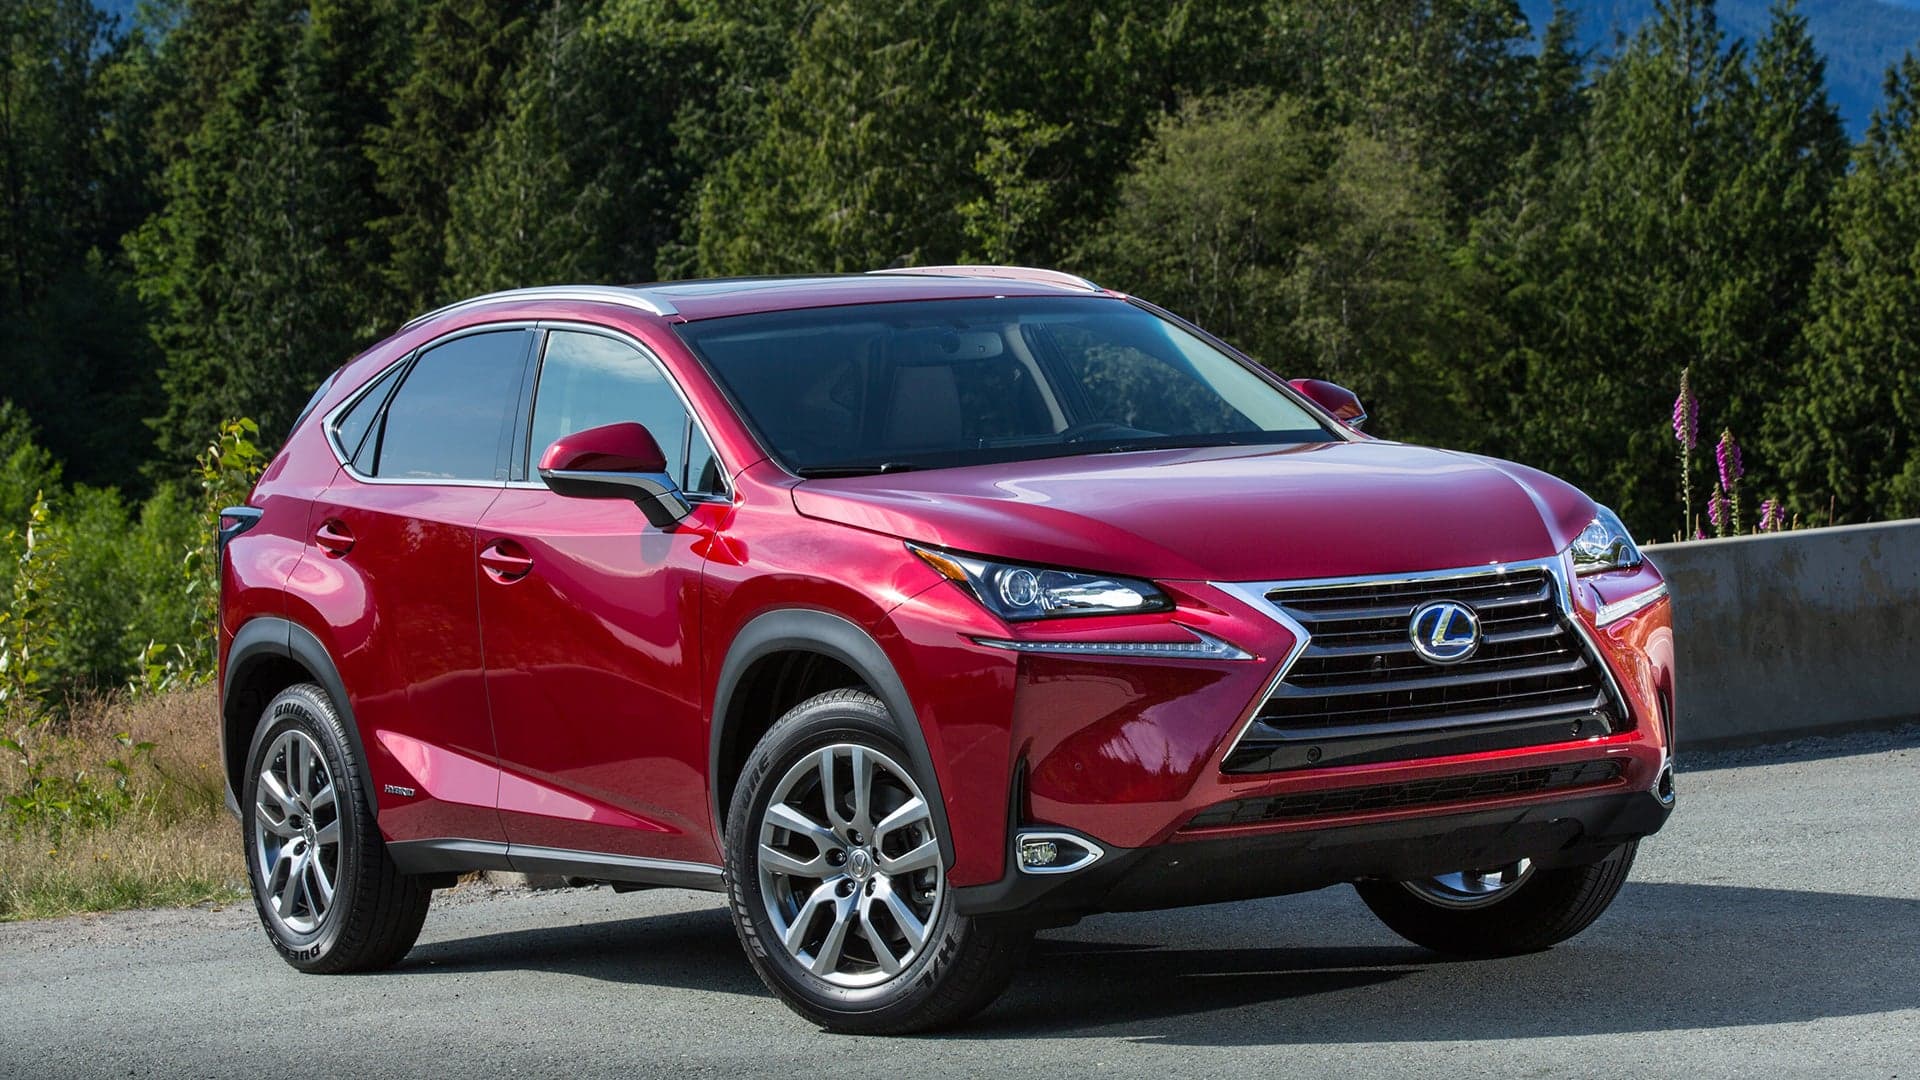 The 2018 Lexus NX300h Hybrid Group Review: Heated Opinions of a Tiny, Fancy Crossover